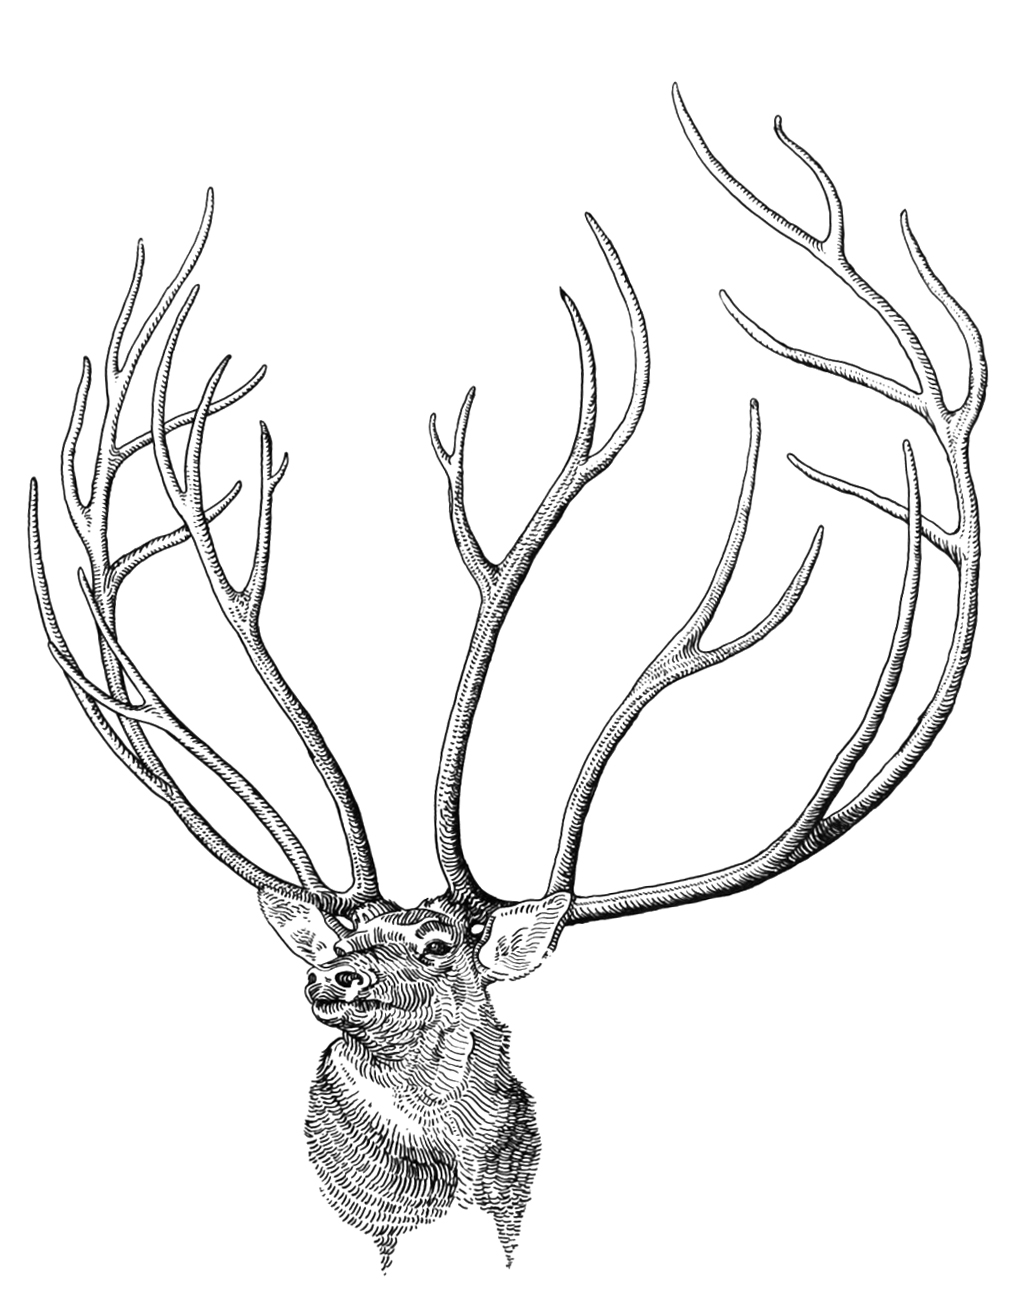  Stewards of the Undying Deer Cult series: The Problem of the Glen 